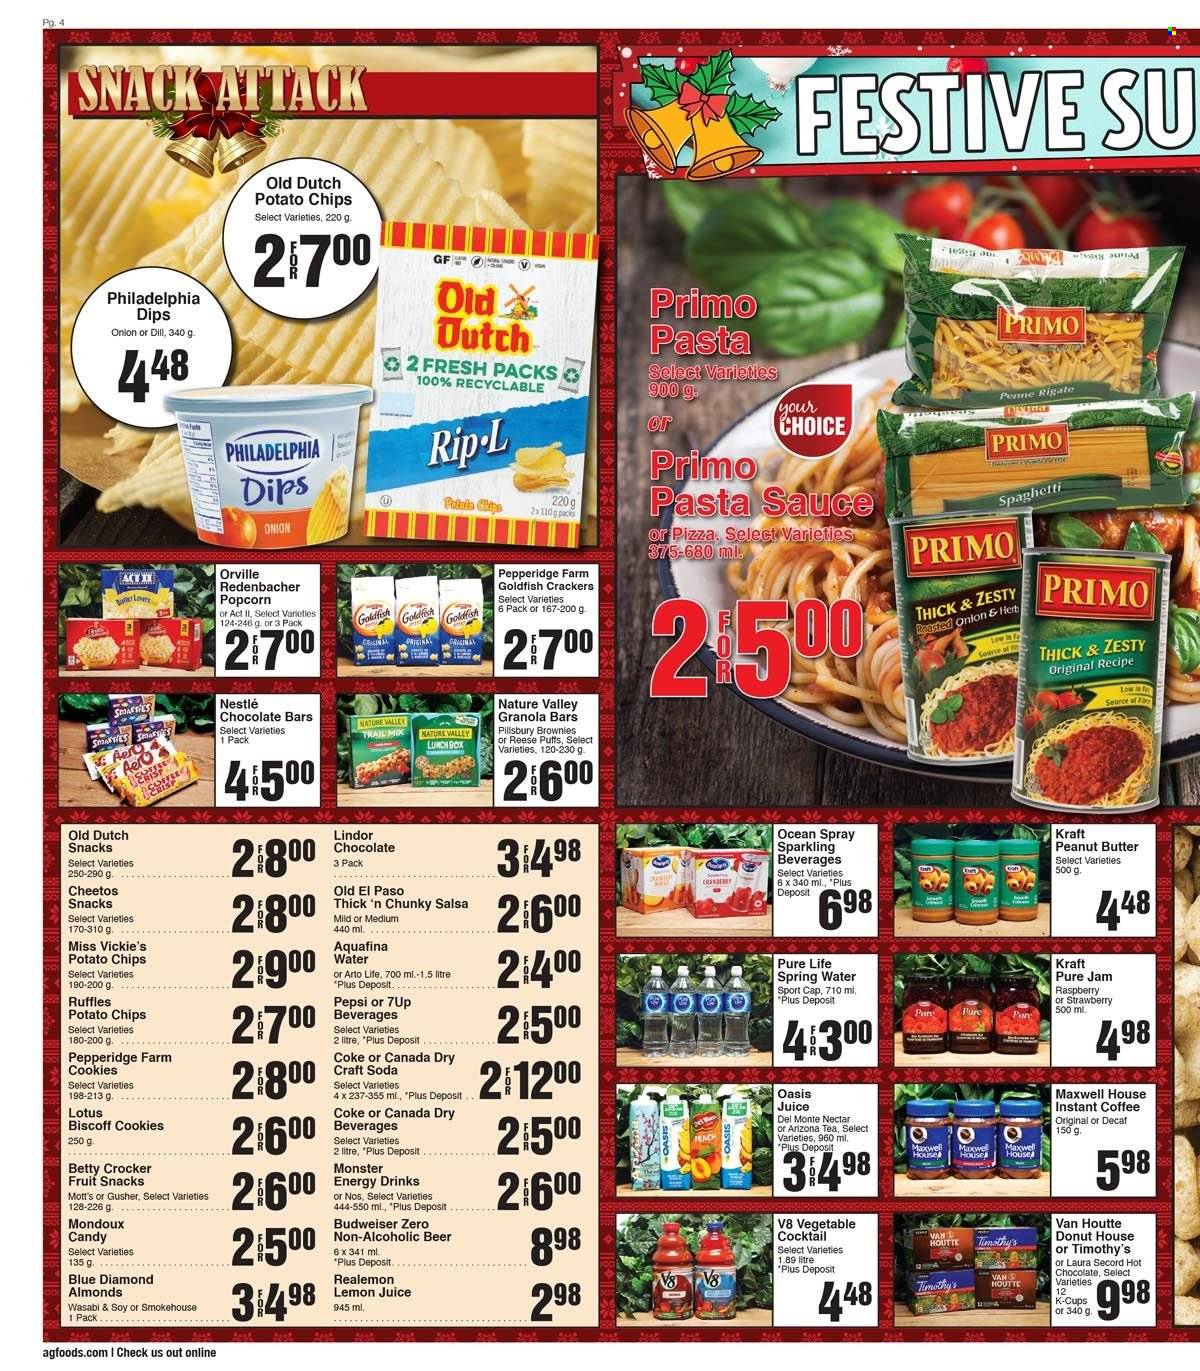 thumbnail - AG Foods Flyer - December 04, 2022 - December 10, 2022 - Sales products - Old El Paso, puffs, brownies, Mott's, spaghetti, pizza, pasta sauce, Pillsbury, Kraft®, cookies, crackers, fruit snack, chocolate bar, potato chips, Cheetos, chips, popcorn, Goldfish, Ruffles, Del Monte, granola bar, Nature Valley, penne, dill, salsa, fruit jam, peanut butter, almonds, Blue Diamond, trail mix, Canada Dry, Coca-Cola, Pepsi, energy drink, Monster, 7UP, Monster Energy, AriZona, Aquafina, spring water, soda, lemon juice, hot chocolate, Maxwell House, tea, coffee, instant coffee, coffee capsules, K-Cups, beer, Lotus, Budweiser, Nestlé, Philadelphia, Lindor, Smarties. Page 4.